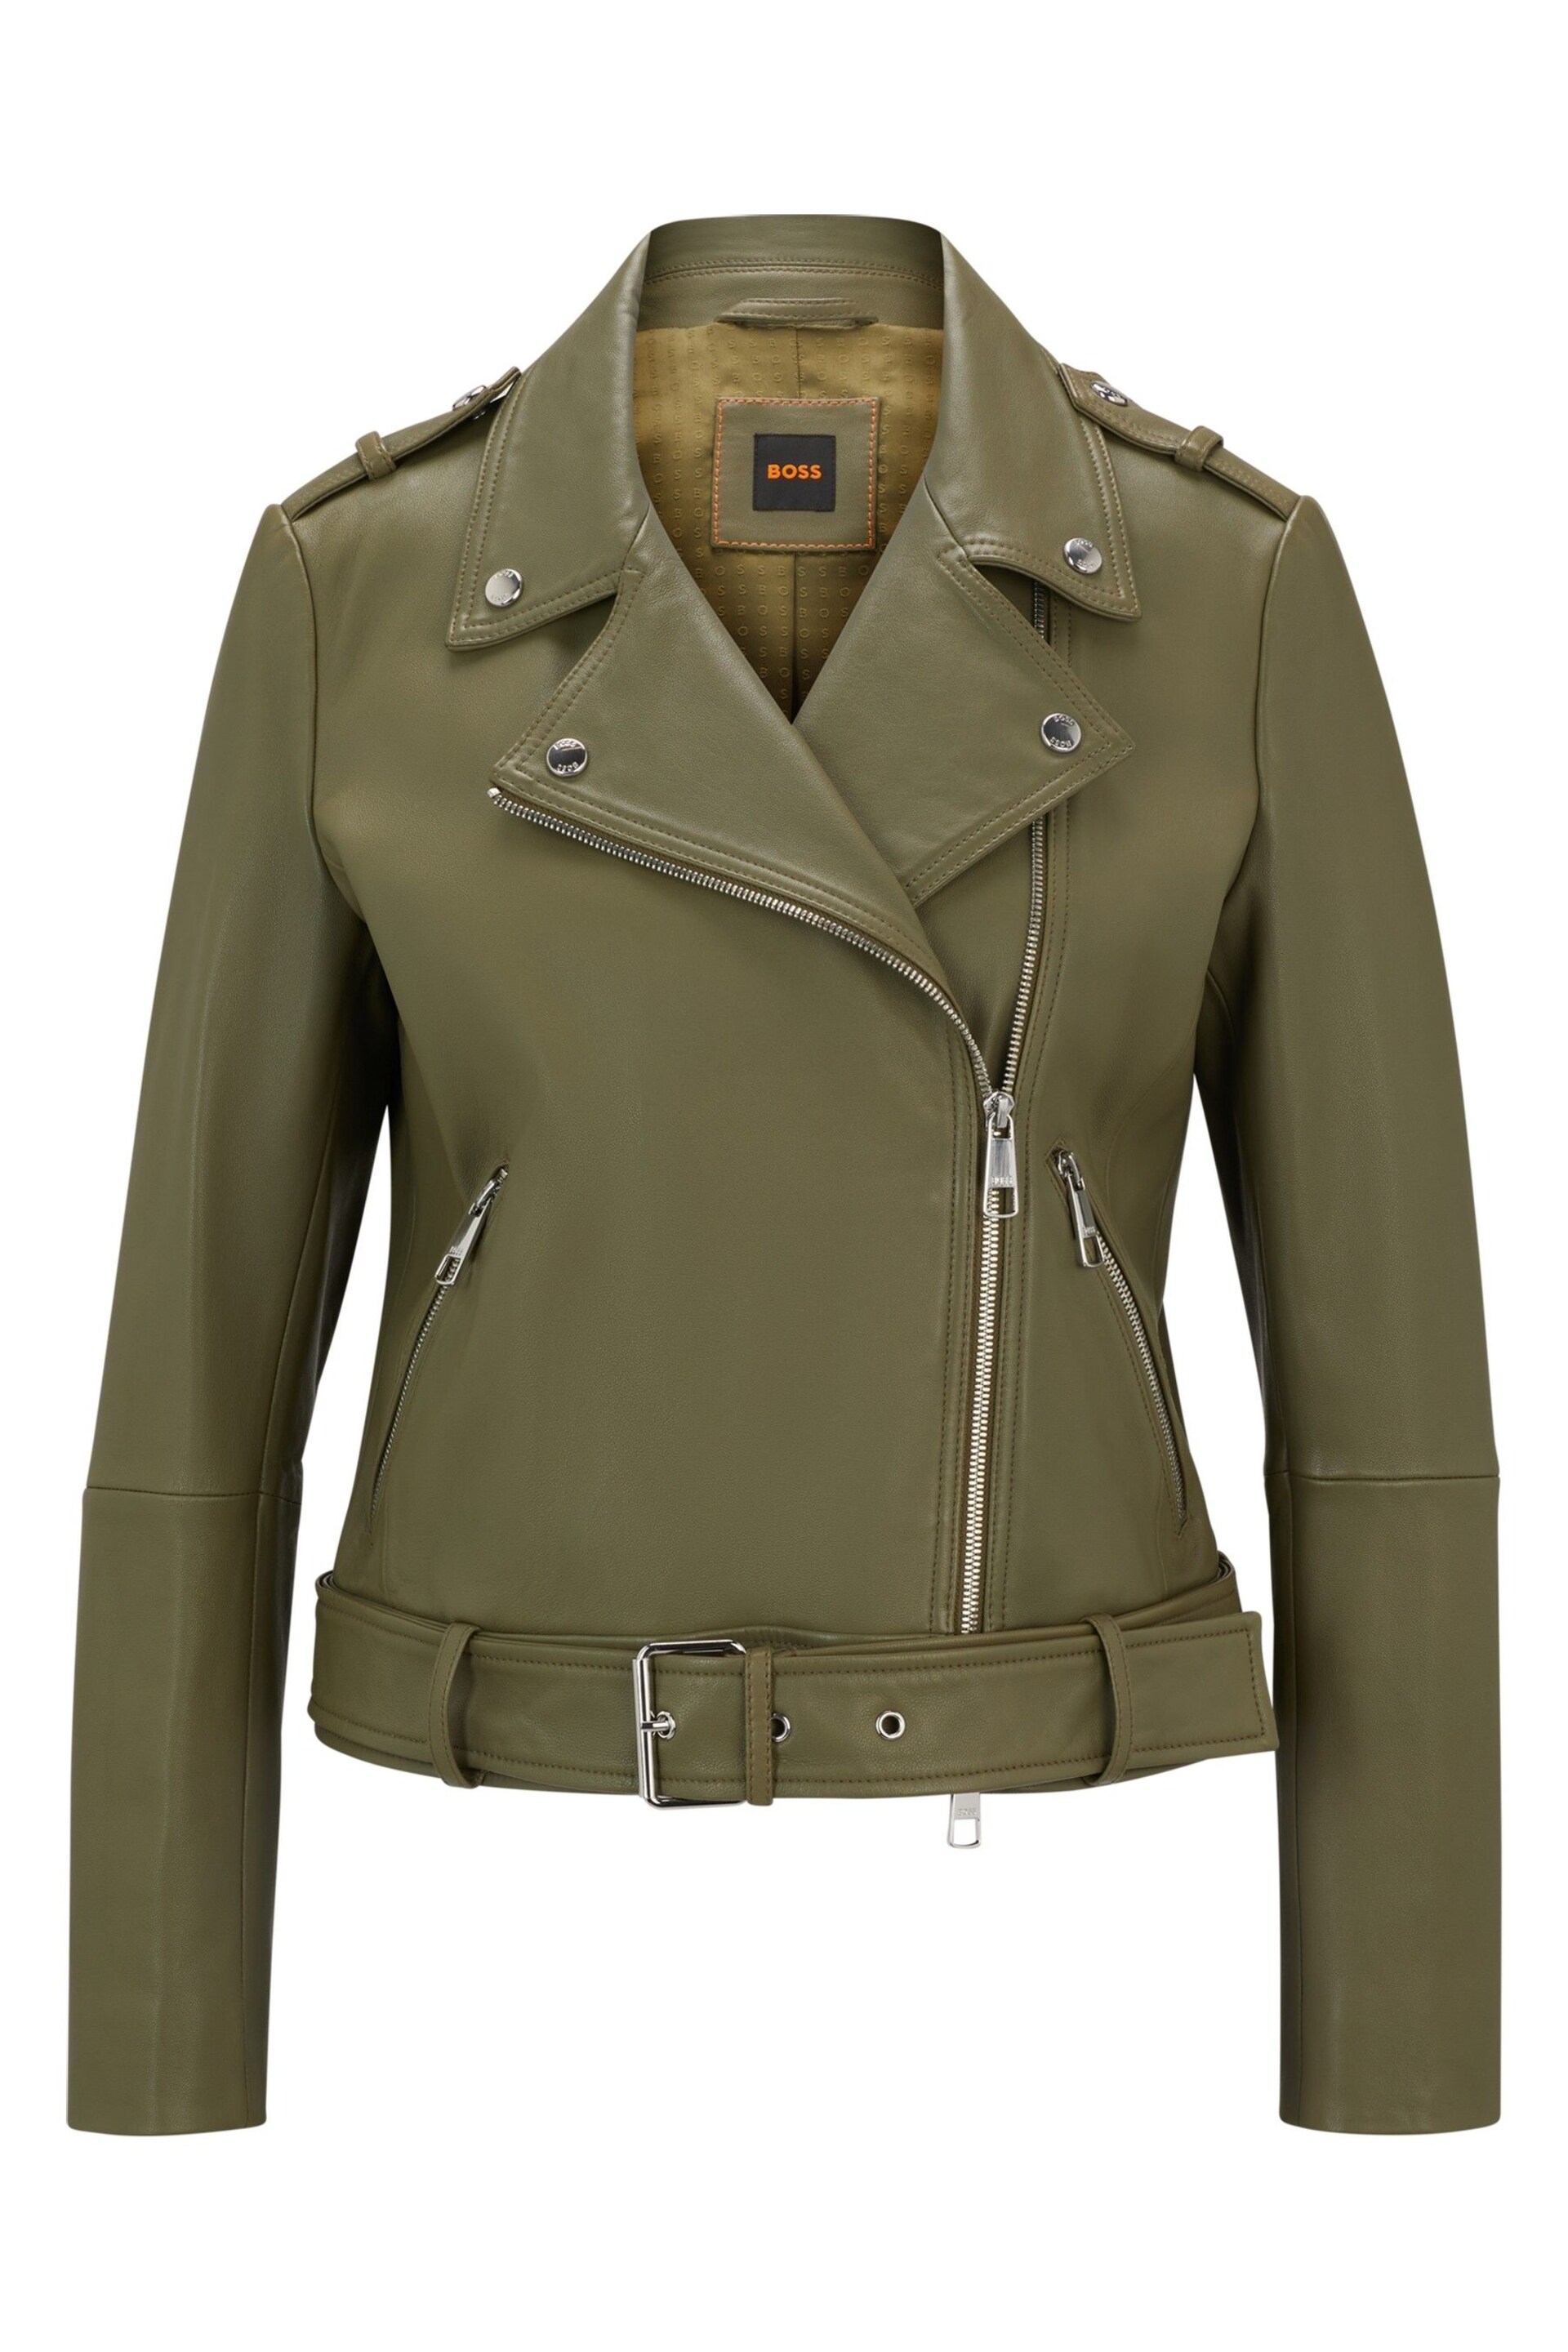 BOSS Green Buckled-Belt Jacket In Nappa Leather - Image 6 of 6